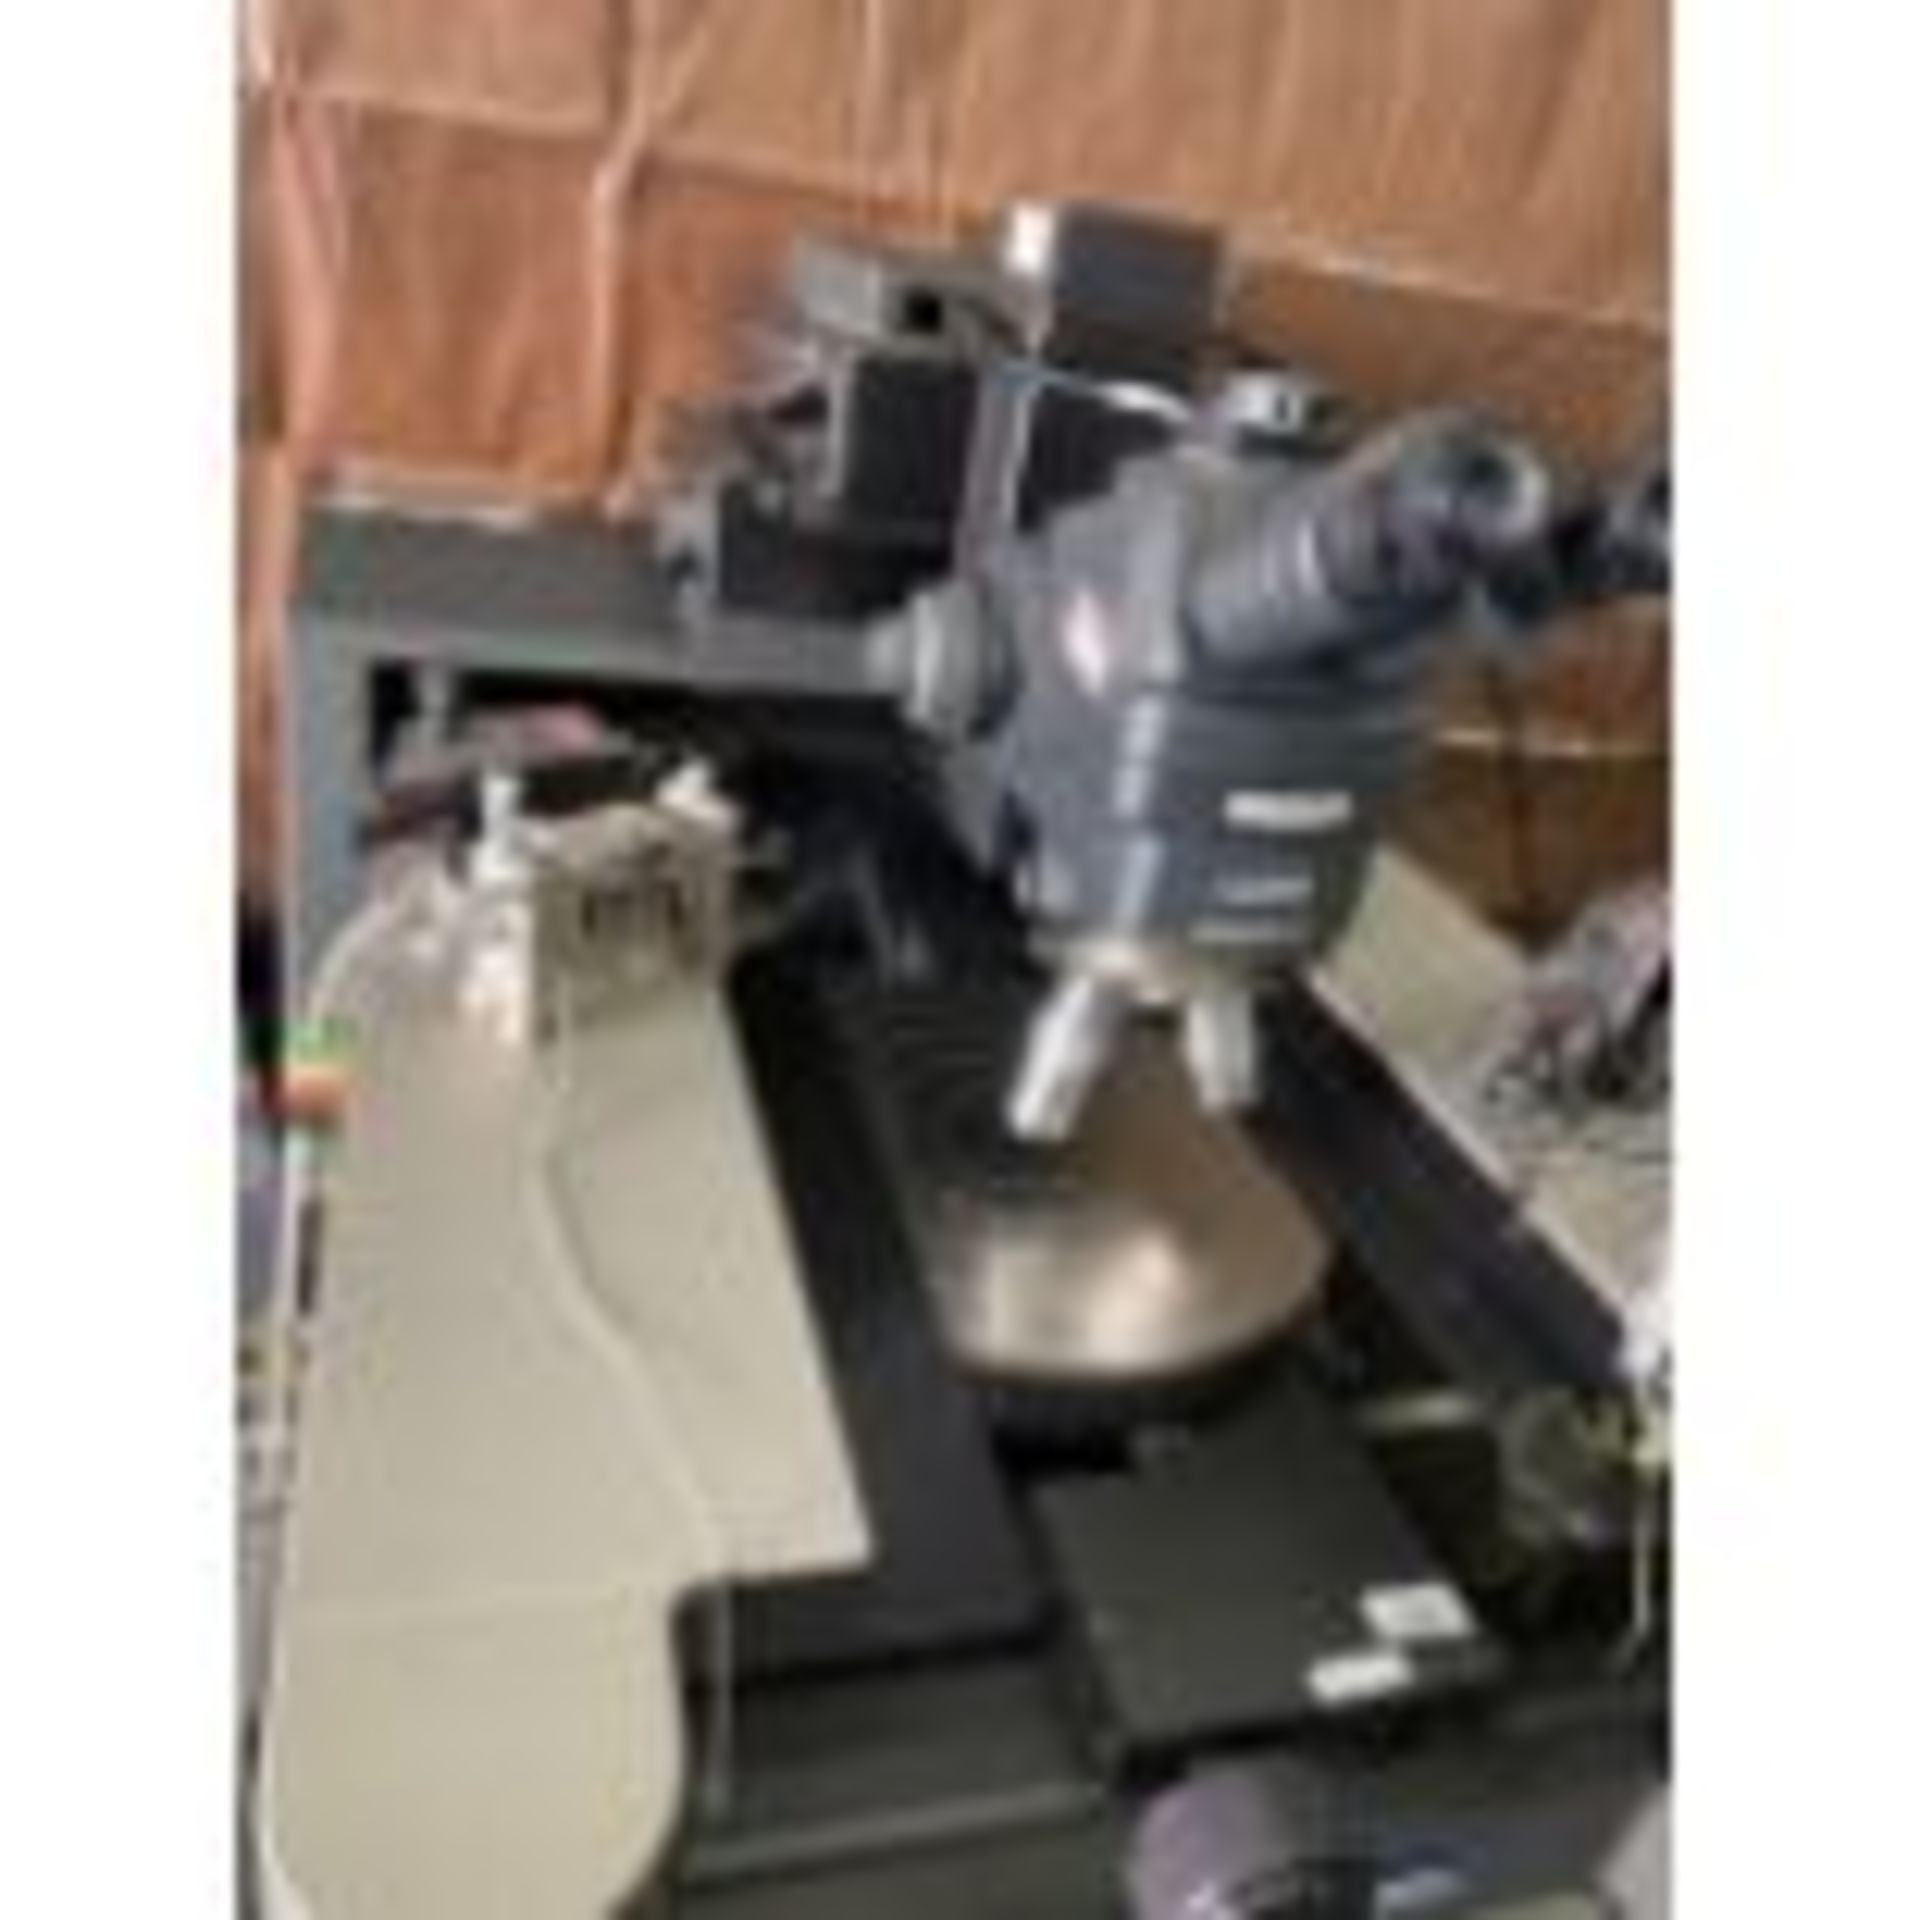 Signatone CM312 300mm Manual Wafer Prober With Isolation Table - Image 2 of 3